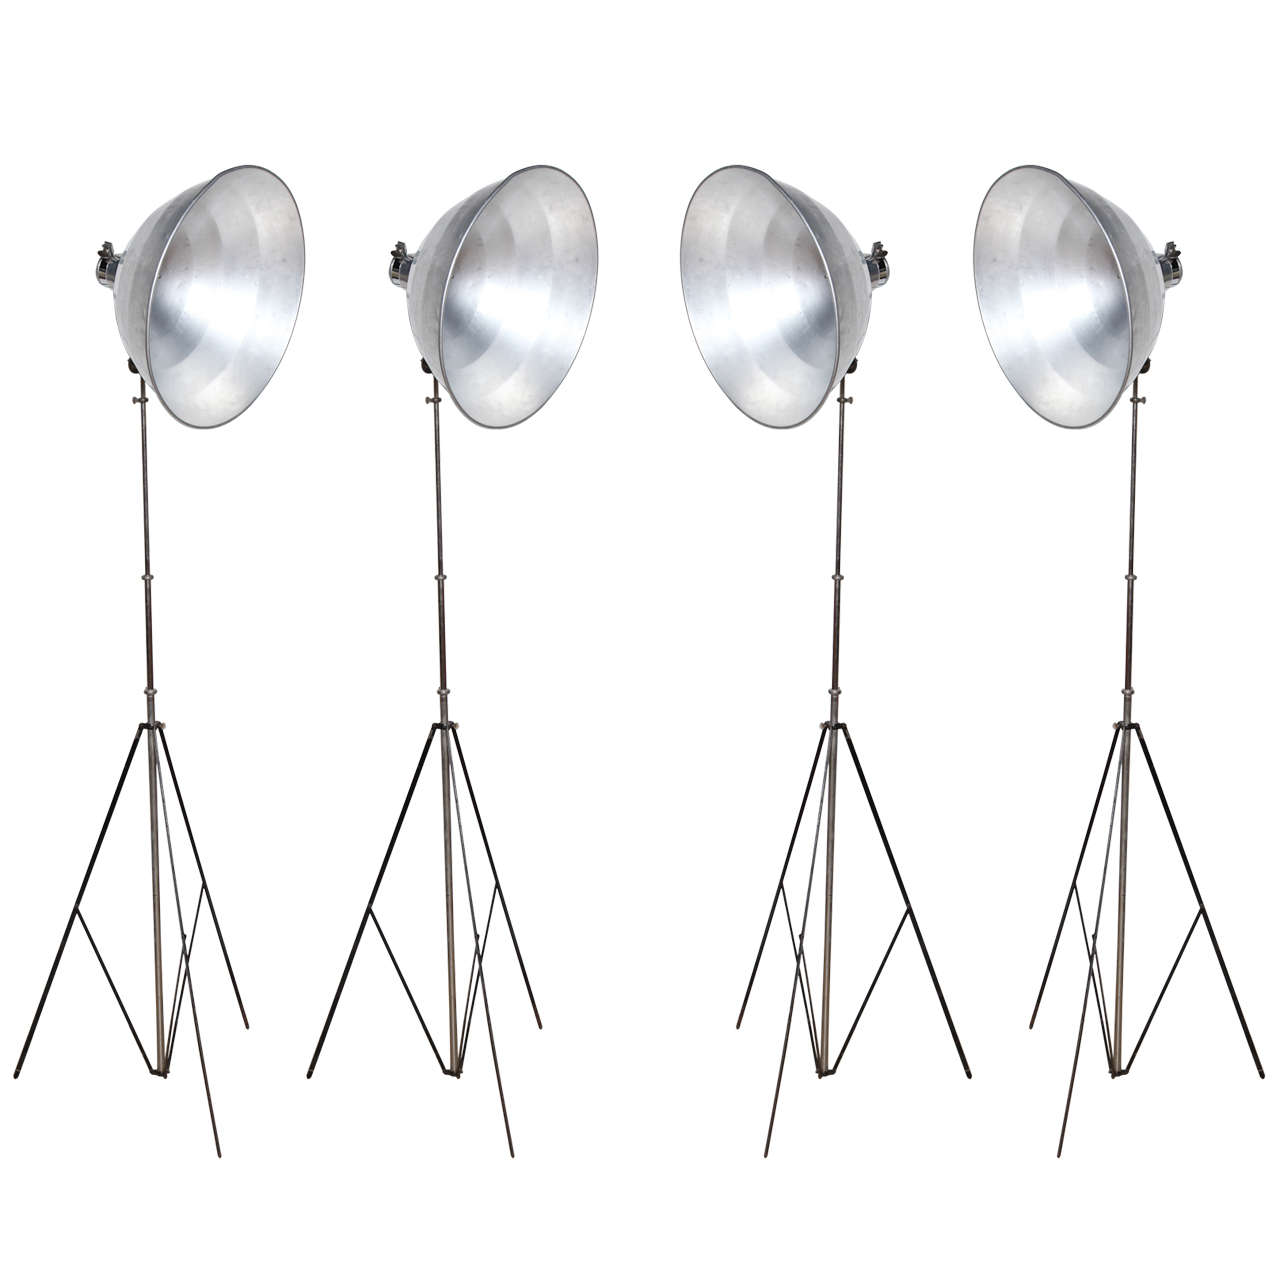 Set of 4 Johnson Ventlite Folding Photo Floor Lamps with Large Aluminum Shades For Sale